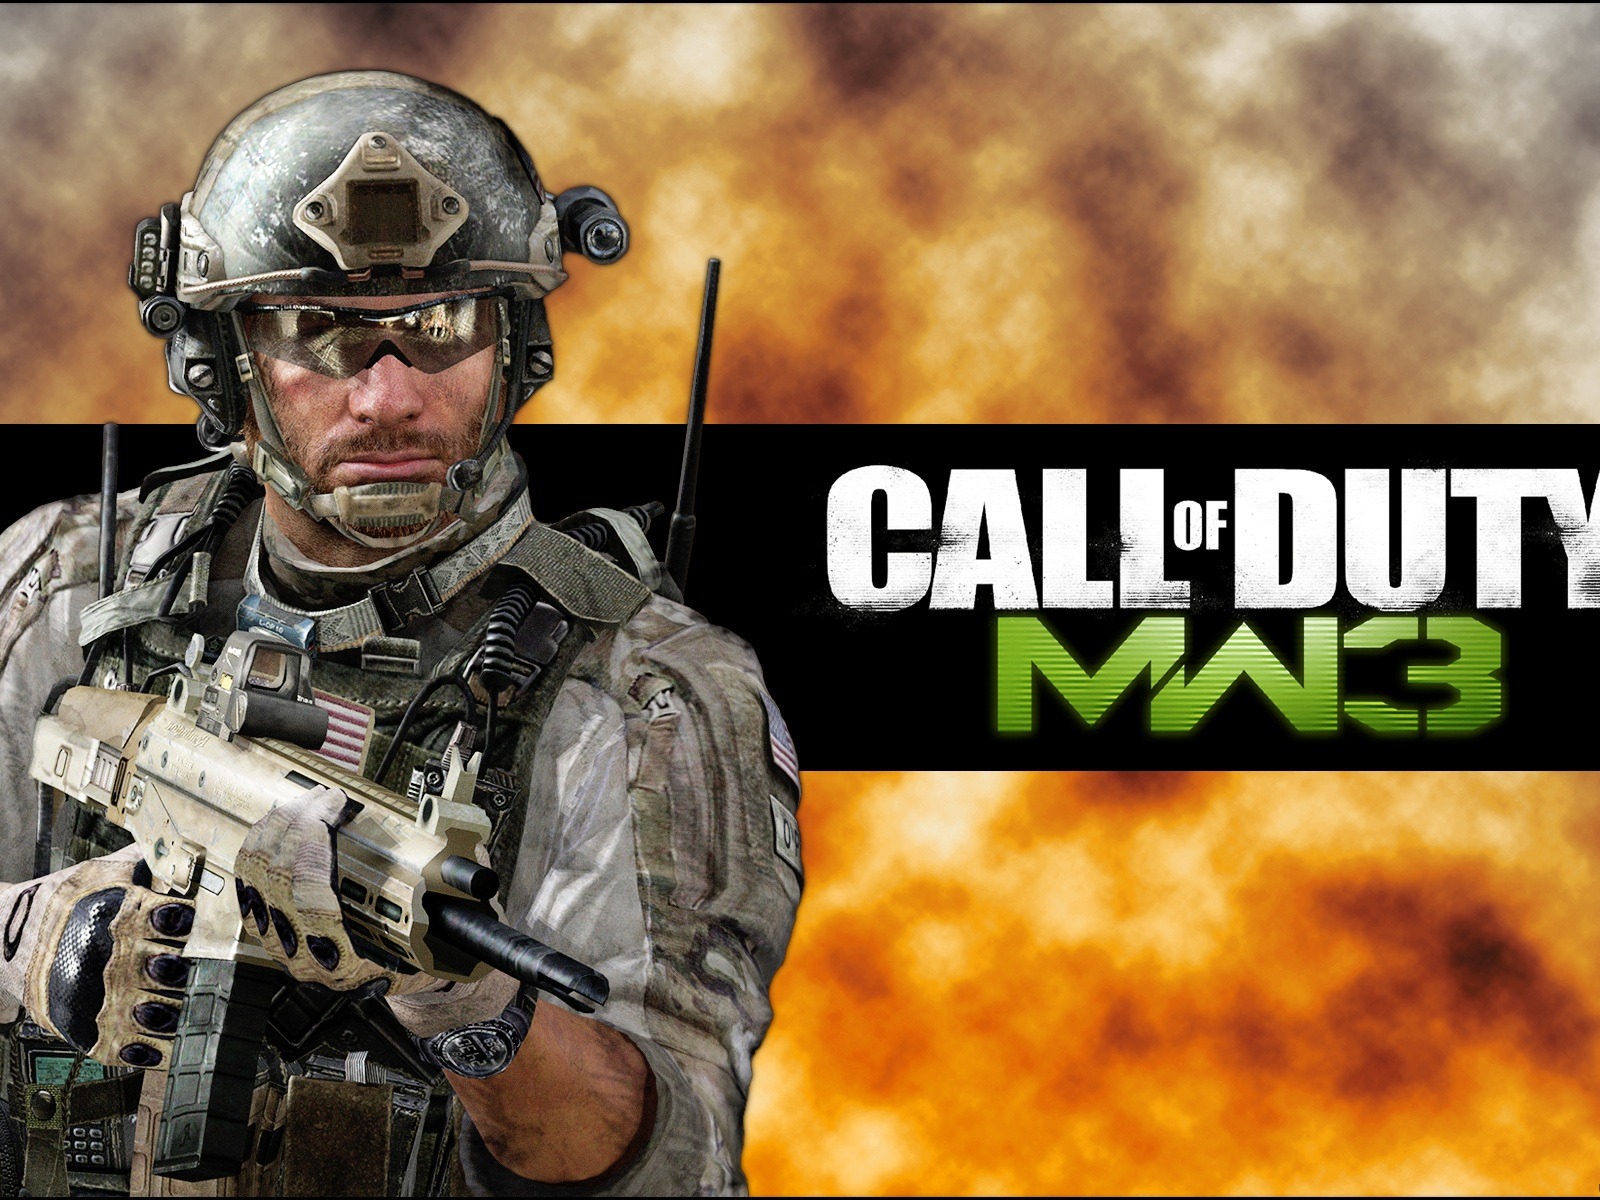 Call of Duty: MW3 HD wallpapers #14 - 1600x1200